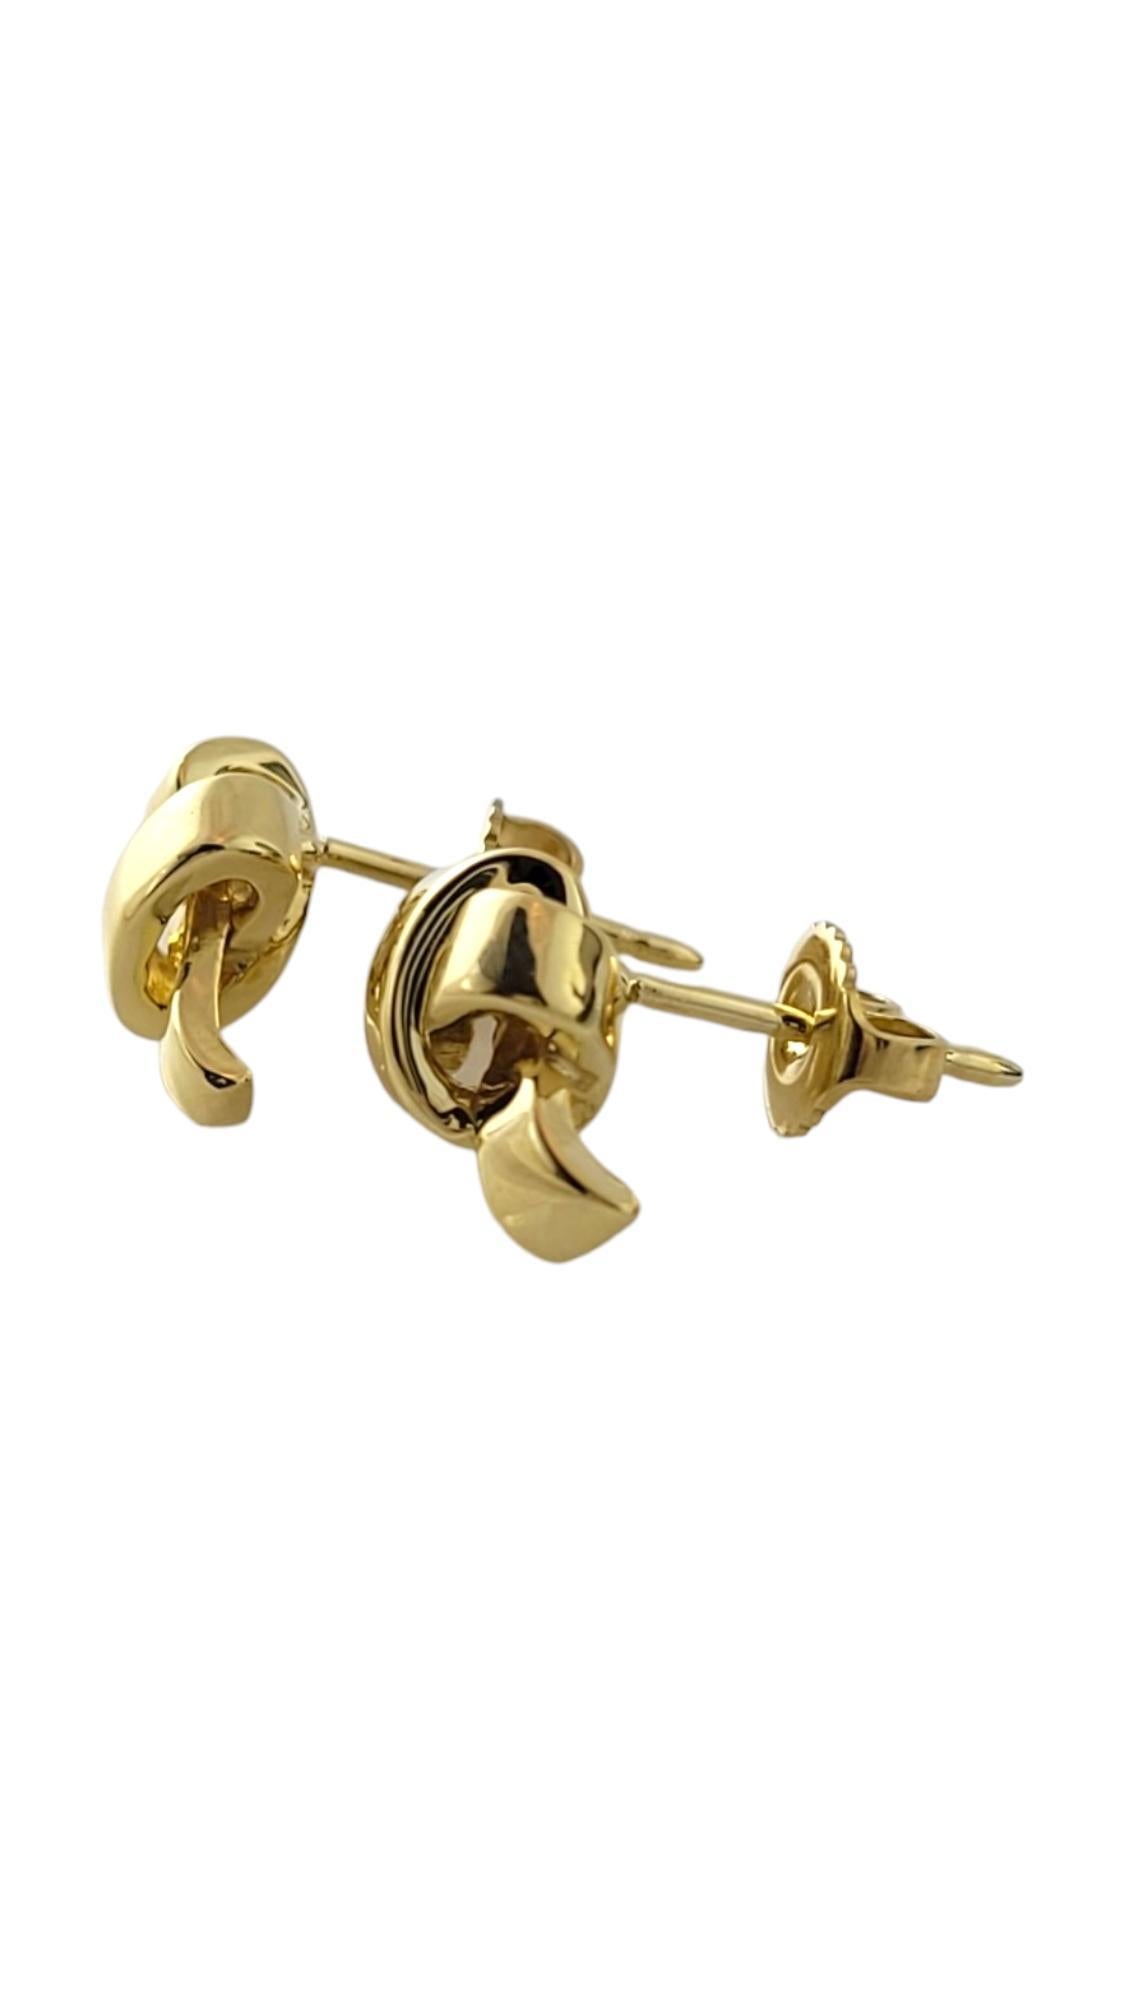 Vintage 18K Yellow Gold Bow Stud Earrings

These gorgeous 18K gold earrings are in the shape of an adorable bow!

Size: 14.9mm X 8.5mm X 4.9mm

Weight: 3.5 dwt/ 5.5 g

Hallmark: 750

Very good condition, professionally polished.

Will come packaged